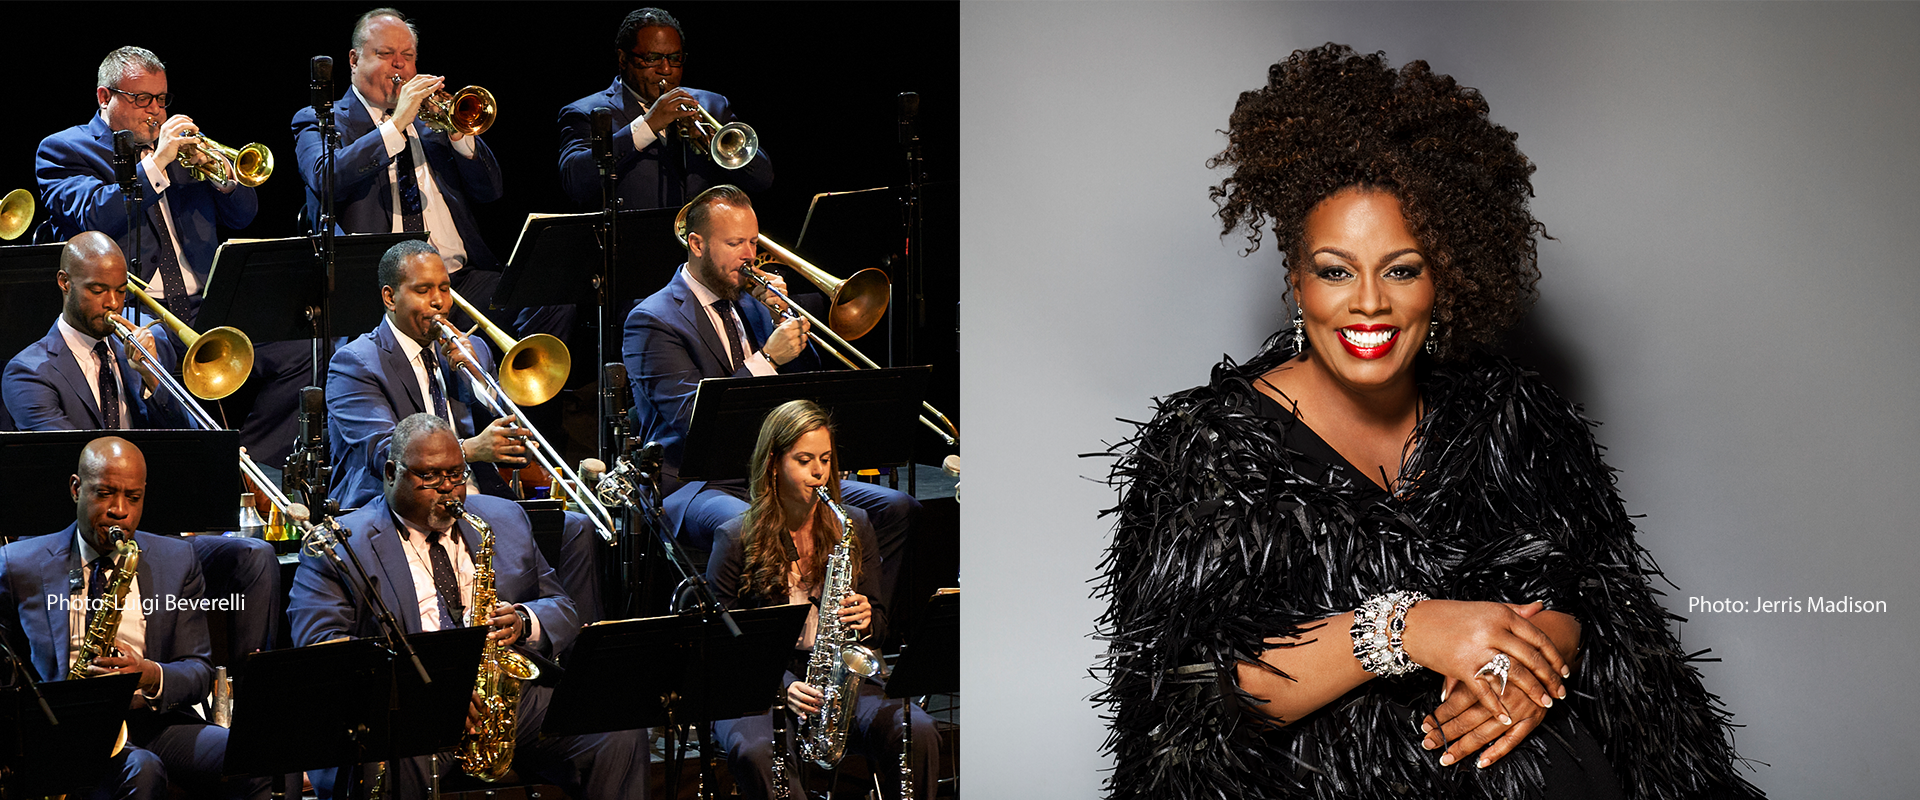 Images of the Jazz at Lincoln Center Orchestra and Dianne Reeves